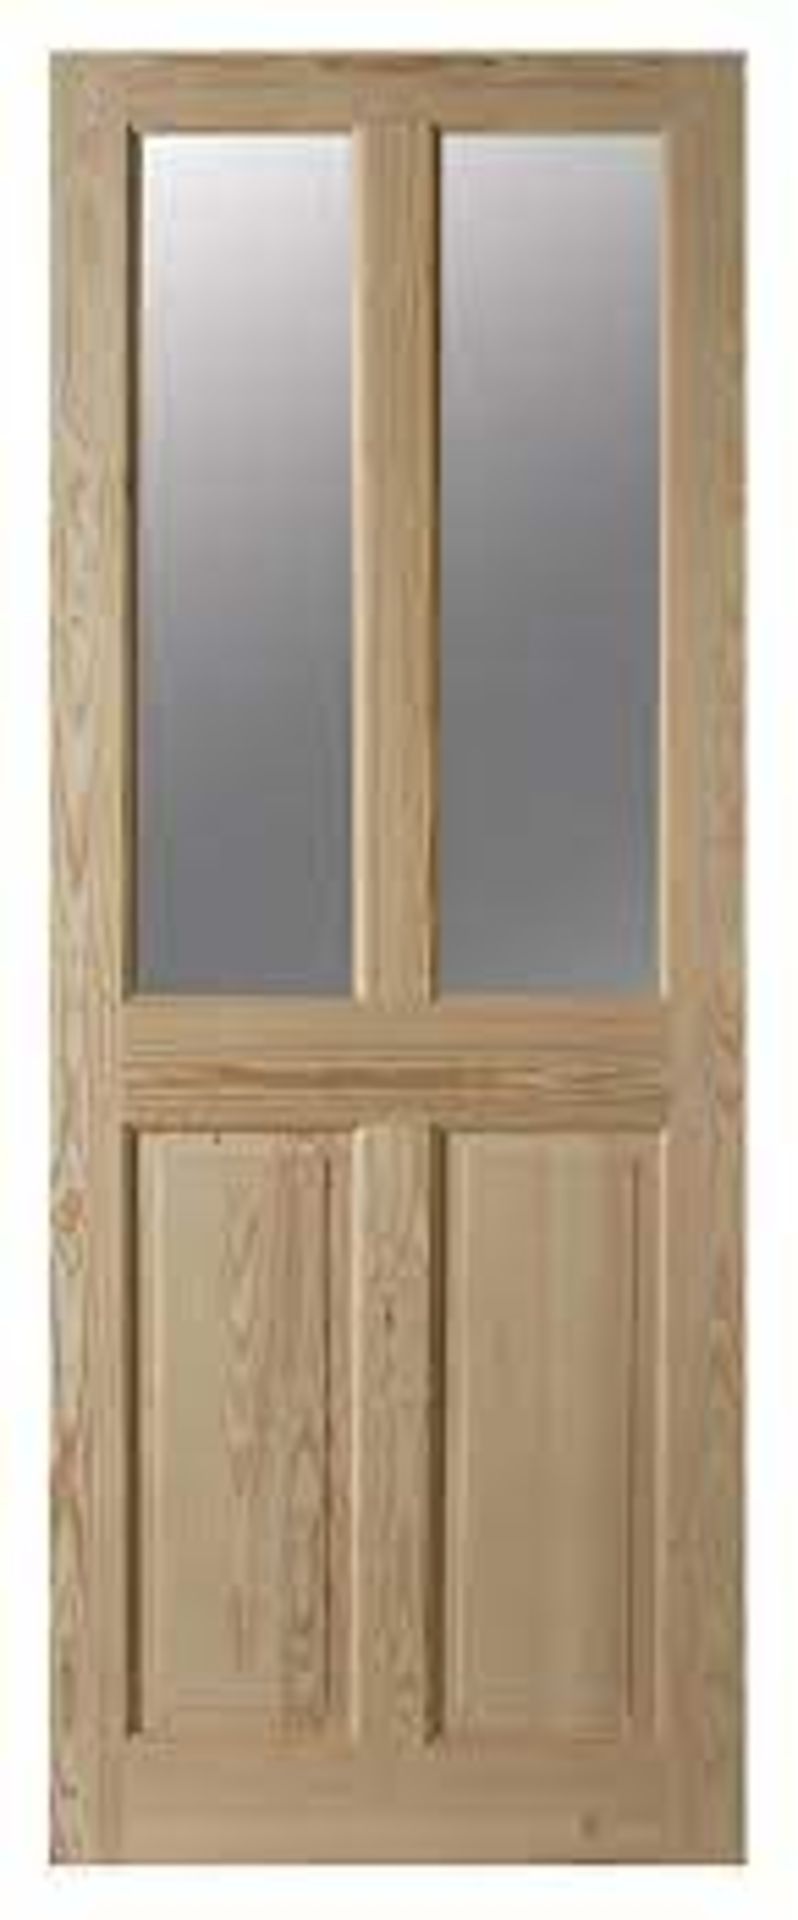 BRAND NEW 4 PANEL GLAZED CLEAR PINE LH AND RH INTERNAL DOOR 1981 X 838MM RRP £114 R4